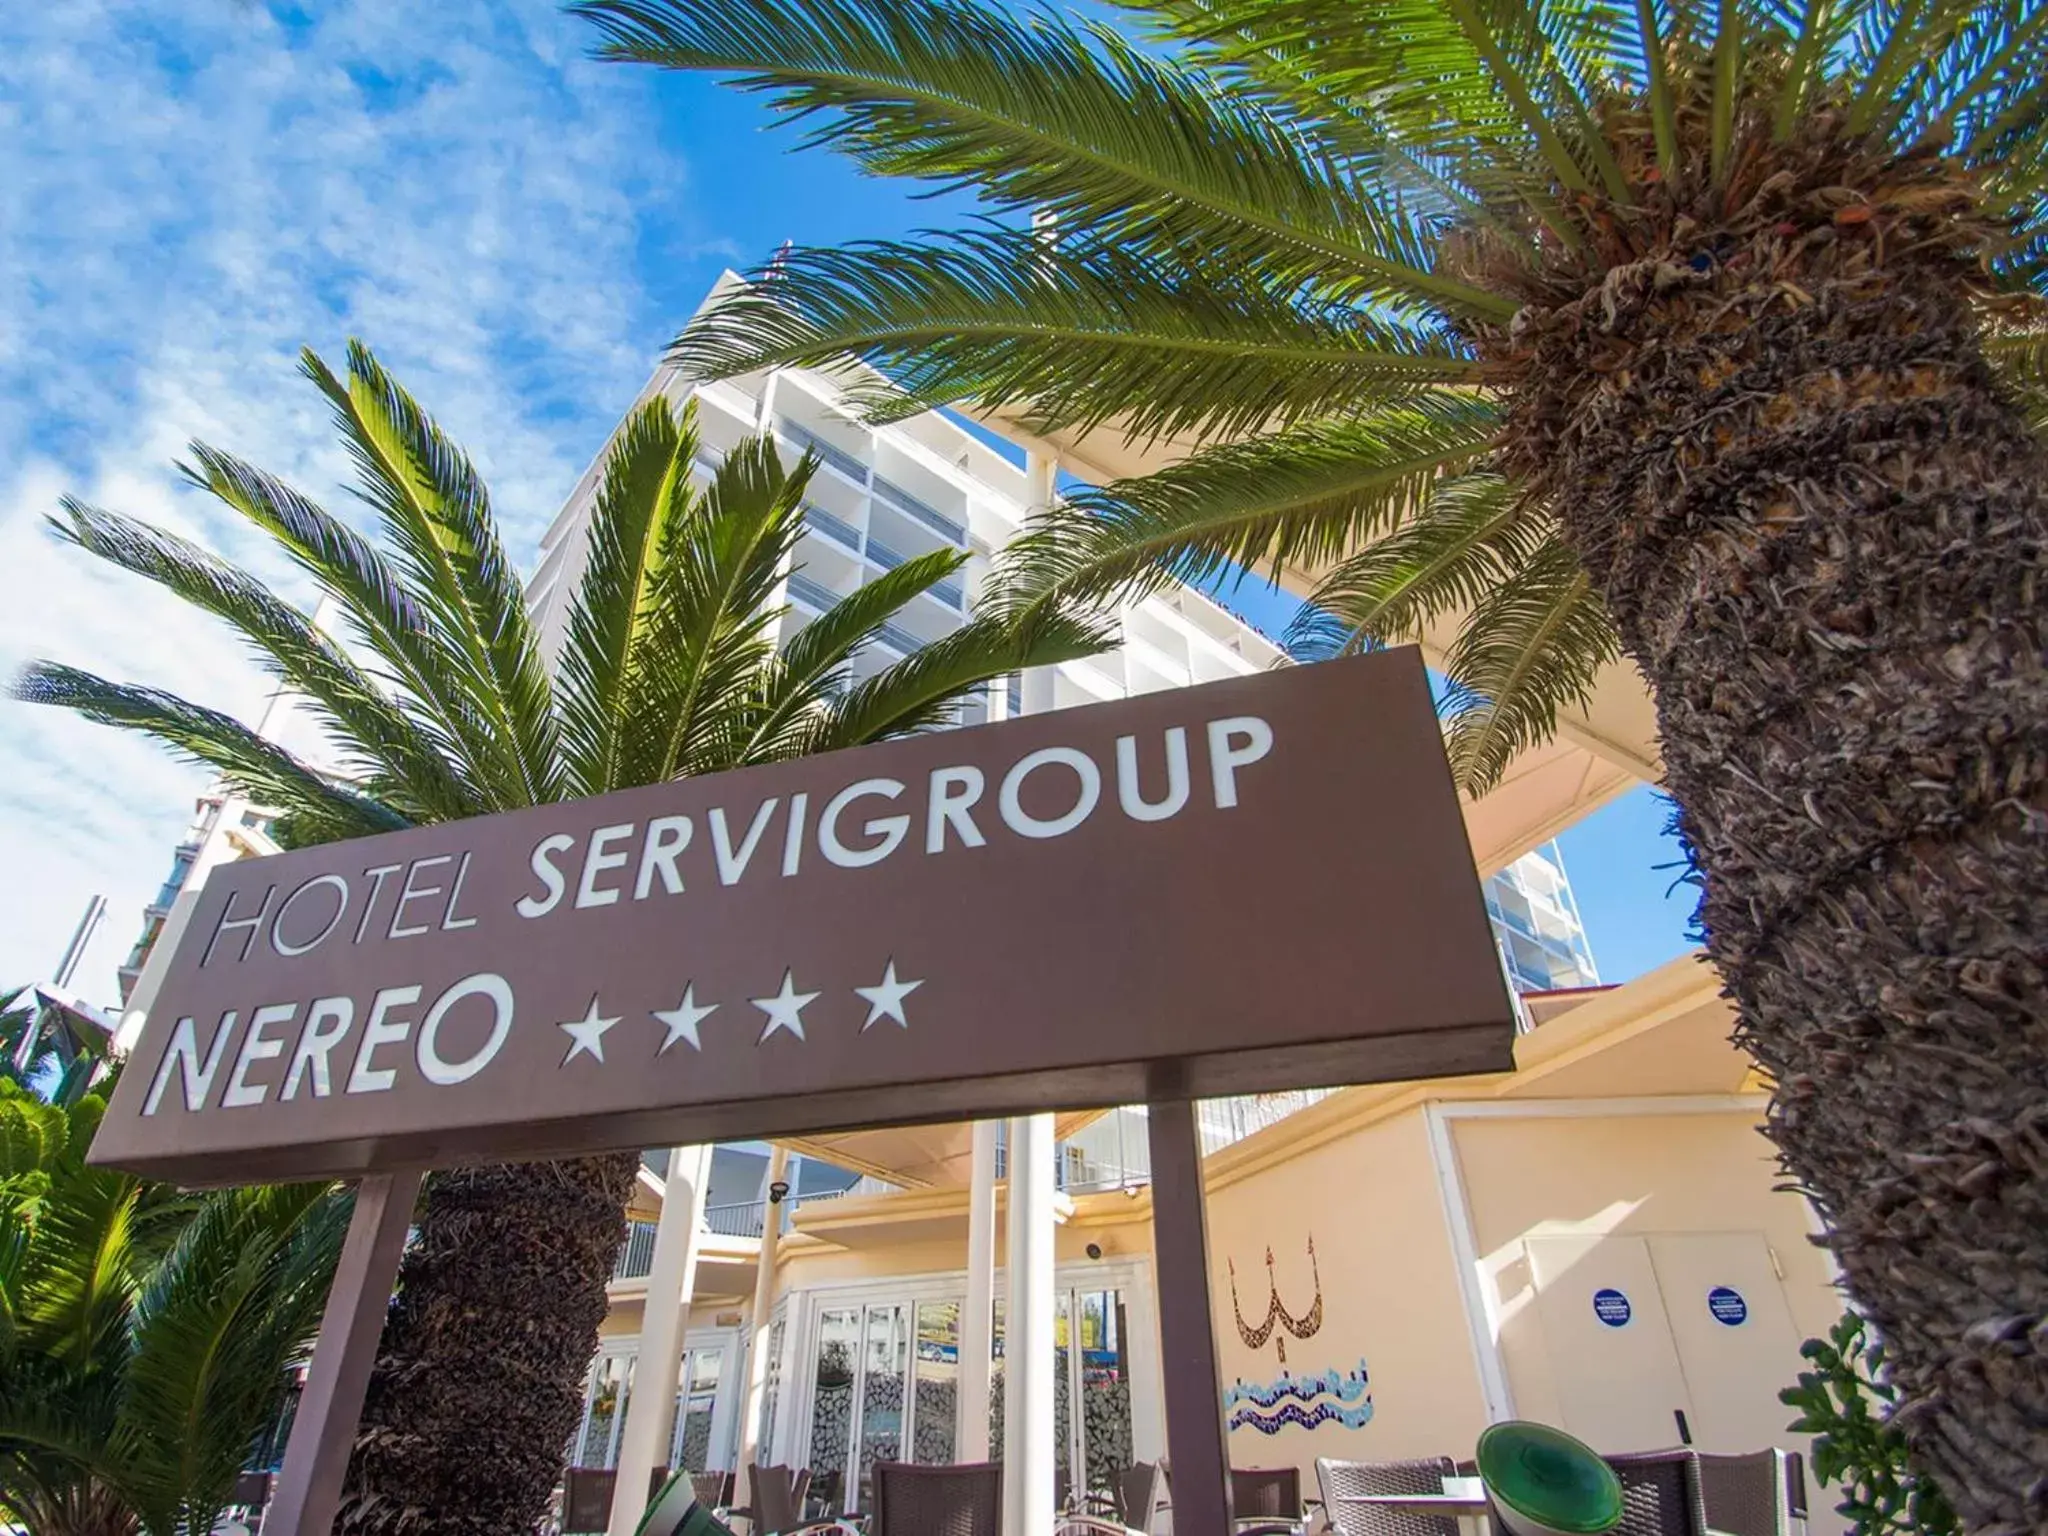 Property logo or sign in Hotel Servigroup Nereo